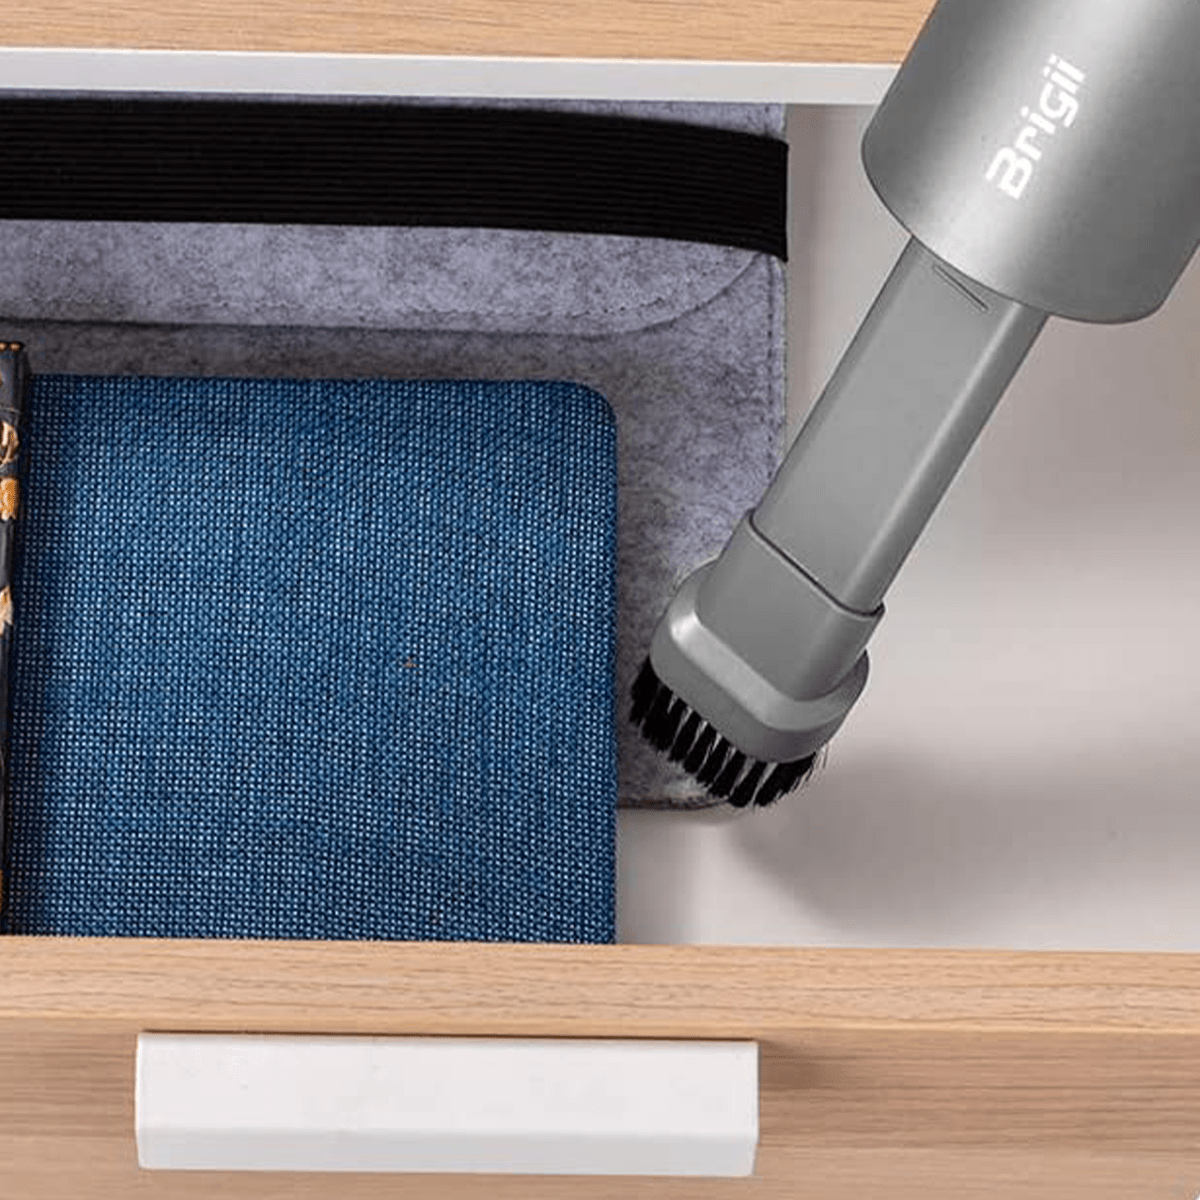 This Mini Vacuum On Amazon Is a Game Changer for Dirty Cabinets